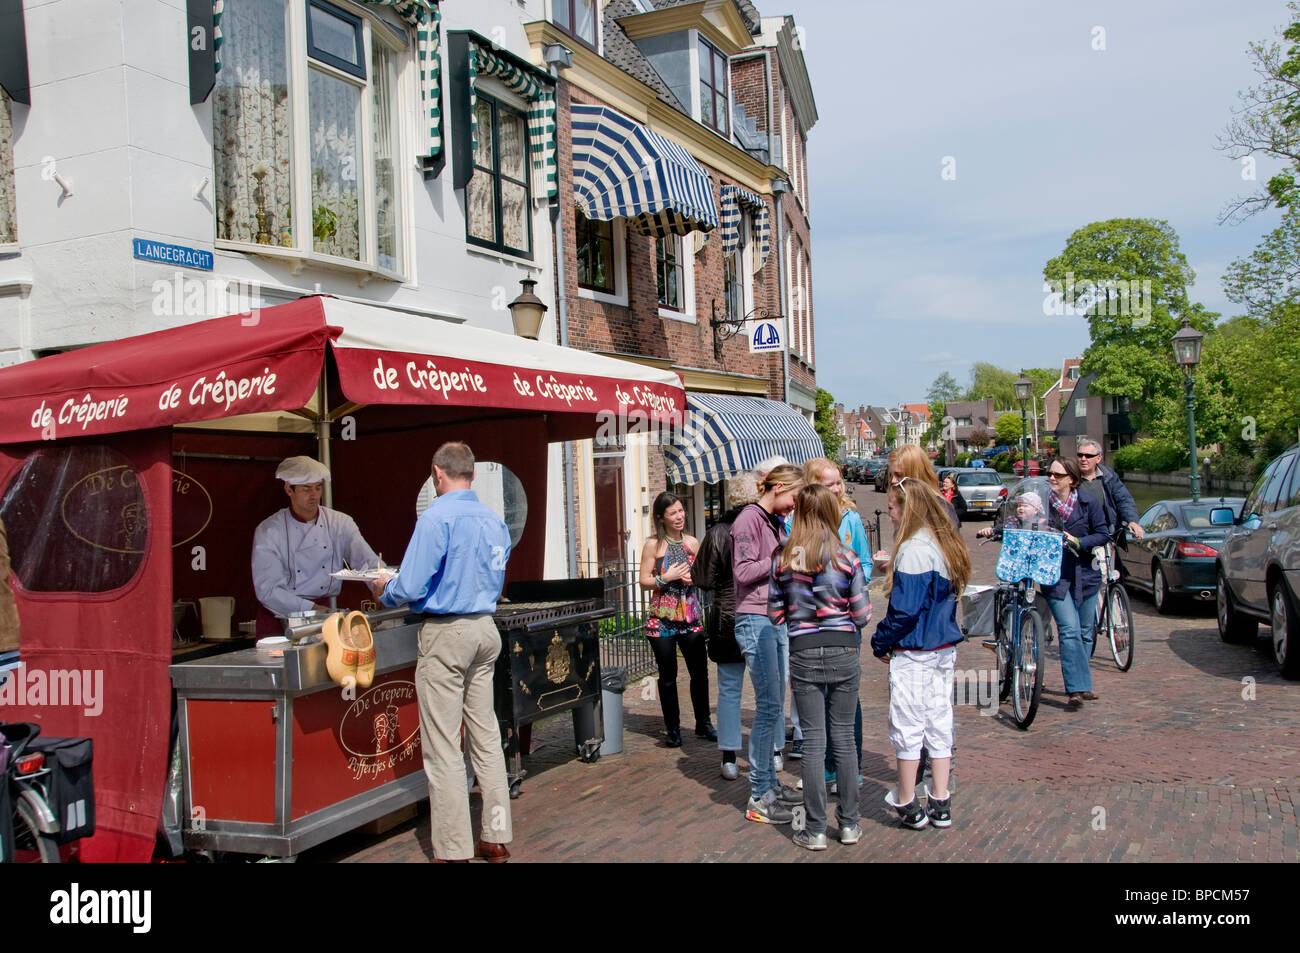 Near utrecht hi-res stock photography and images - Alamy